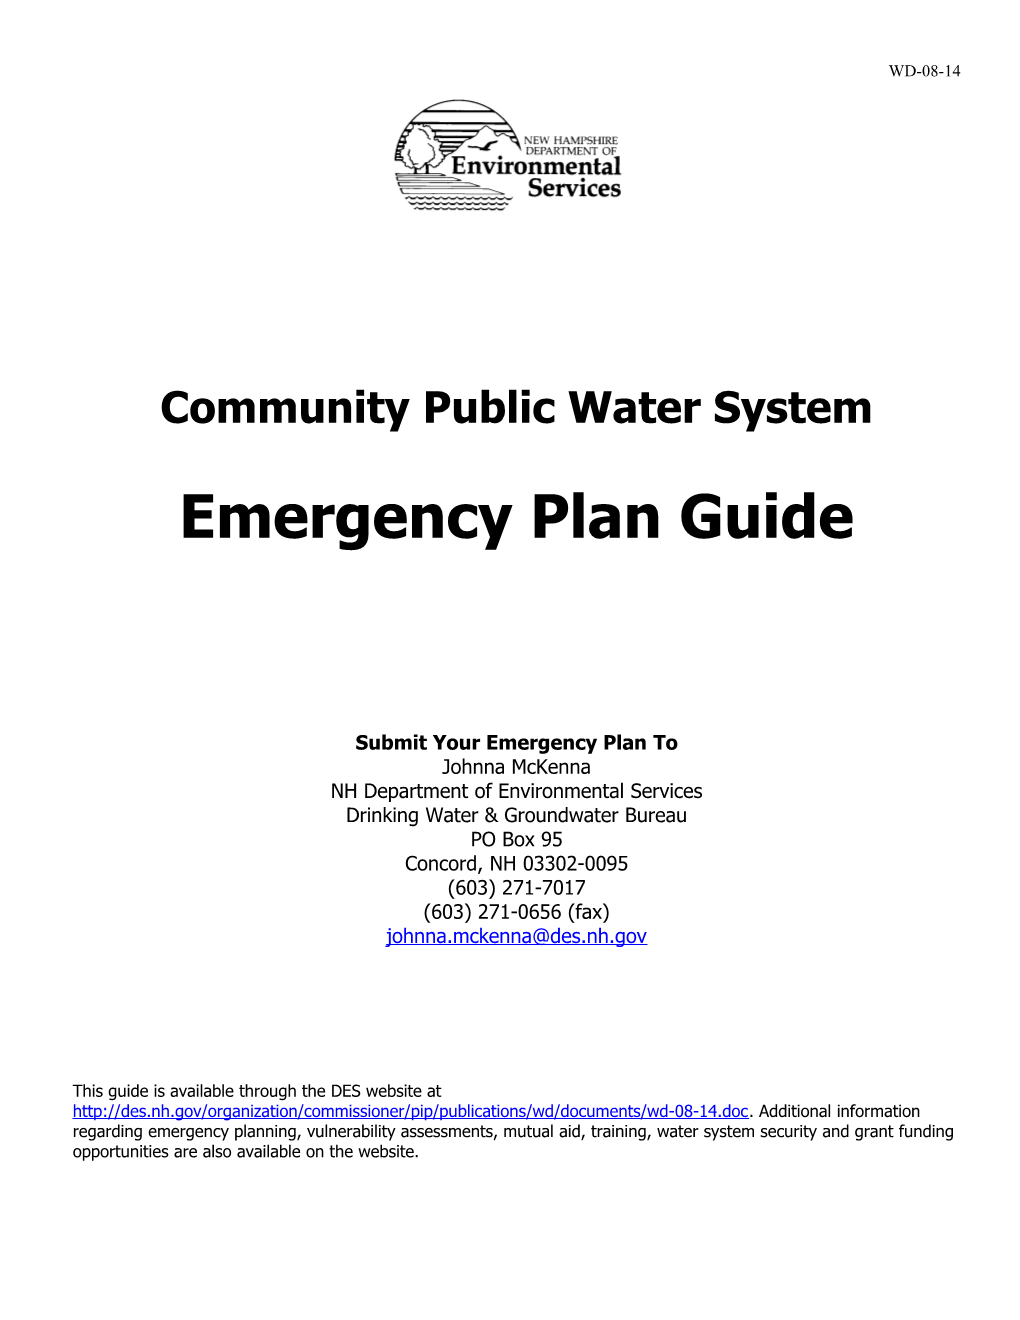 Community Water System Emergency Plan Guide - Page 1 of 23Rev. 2014